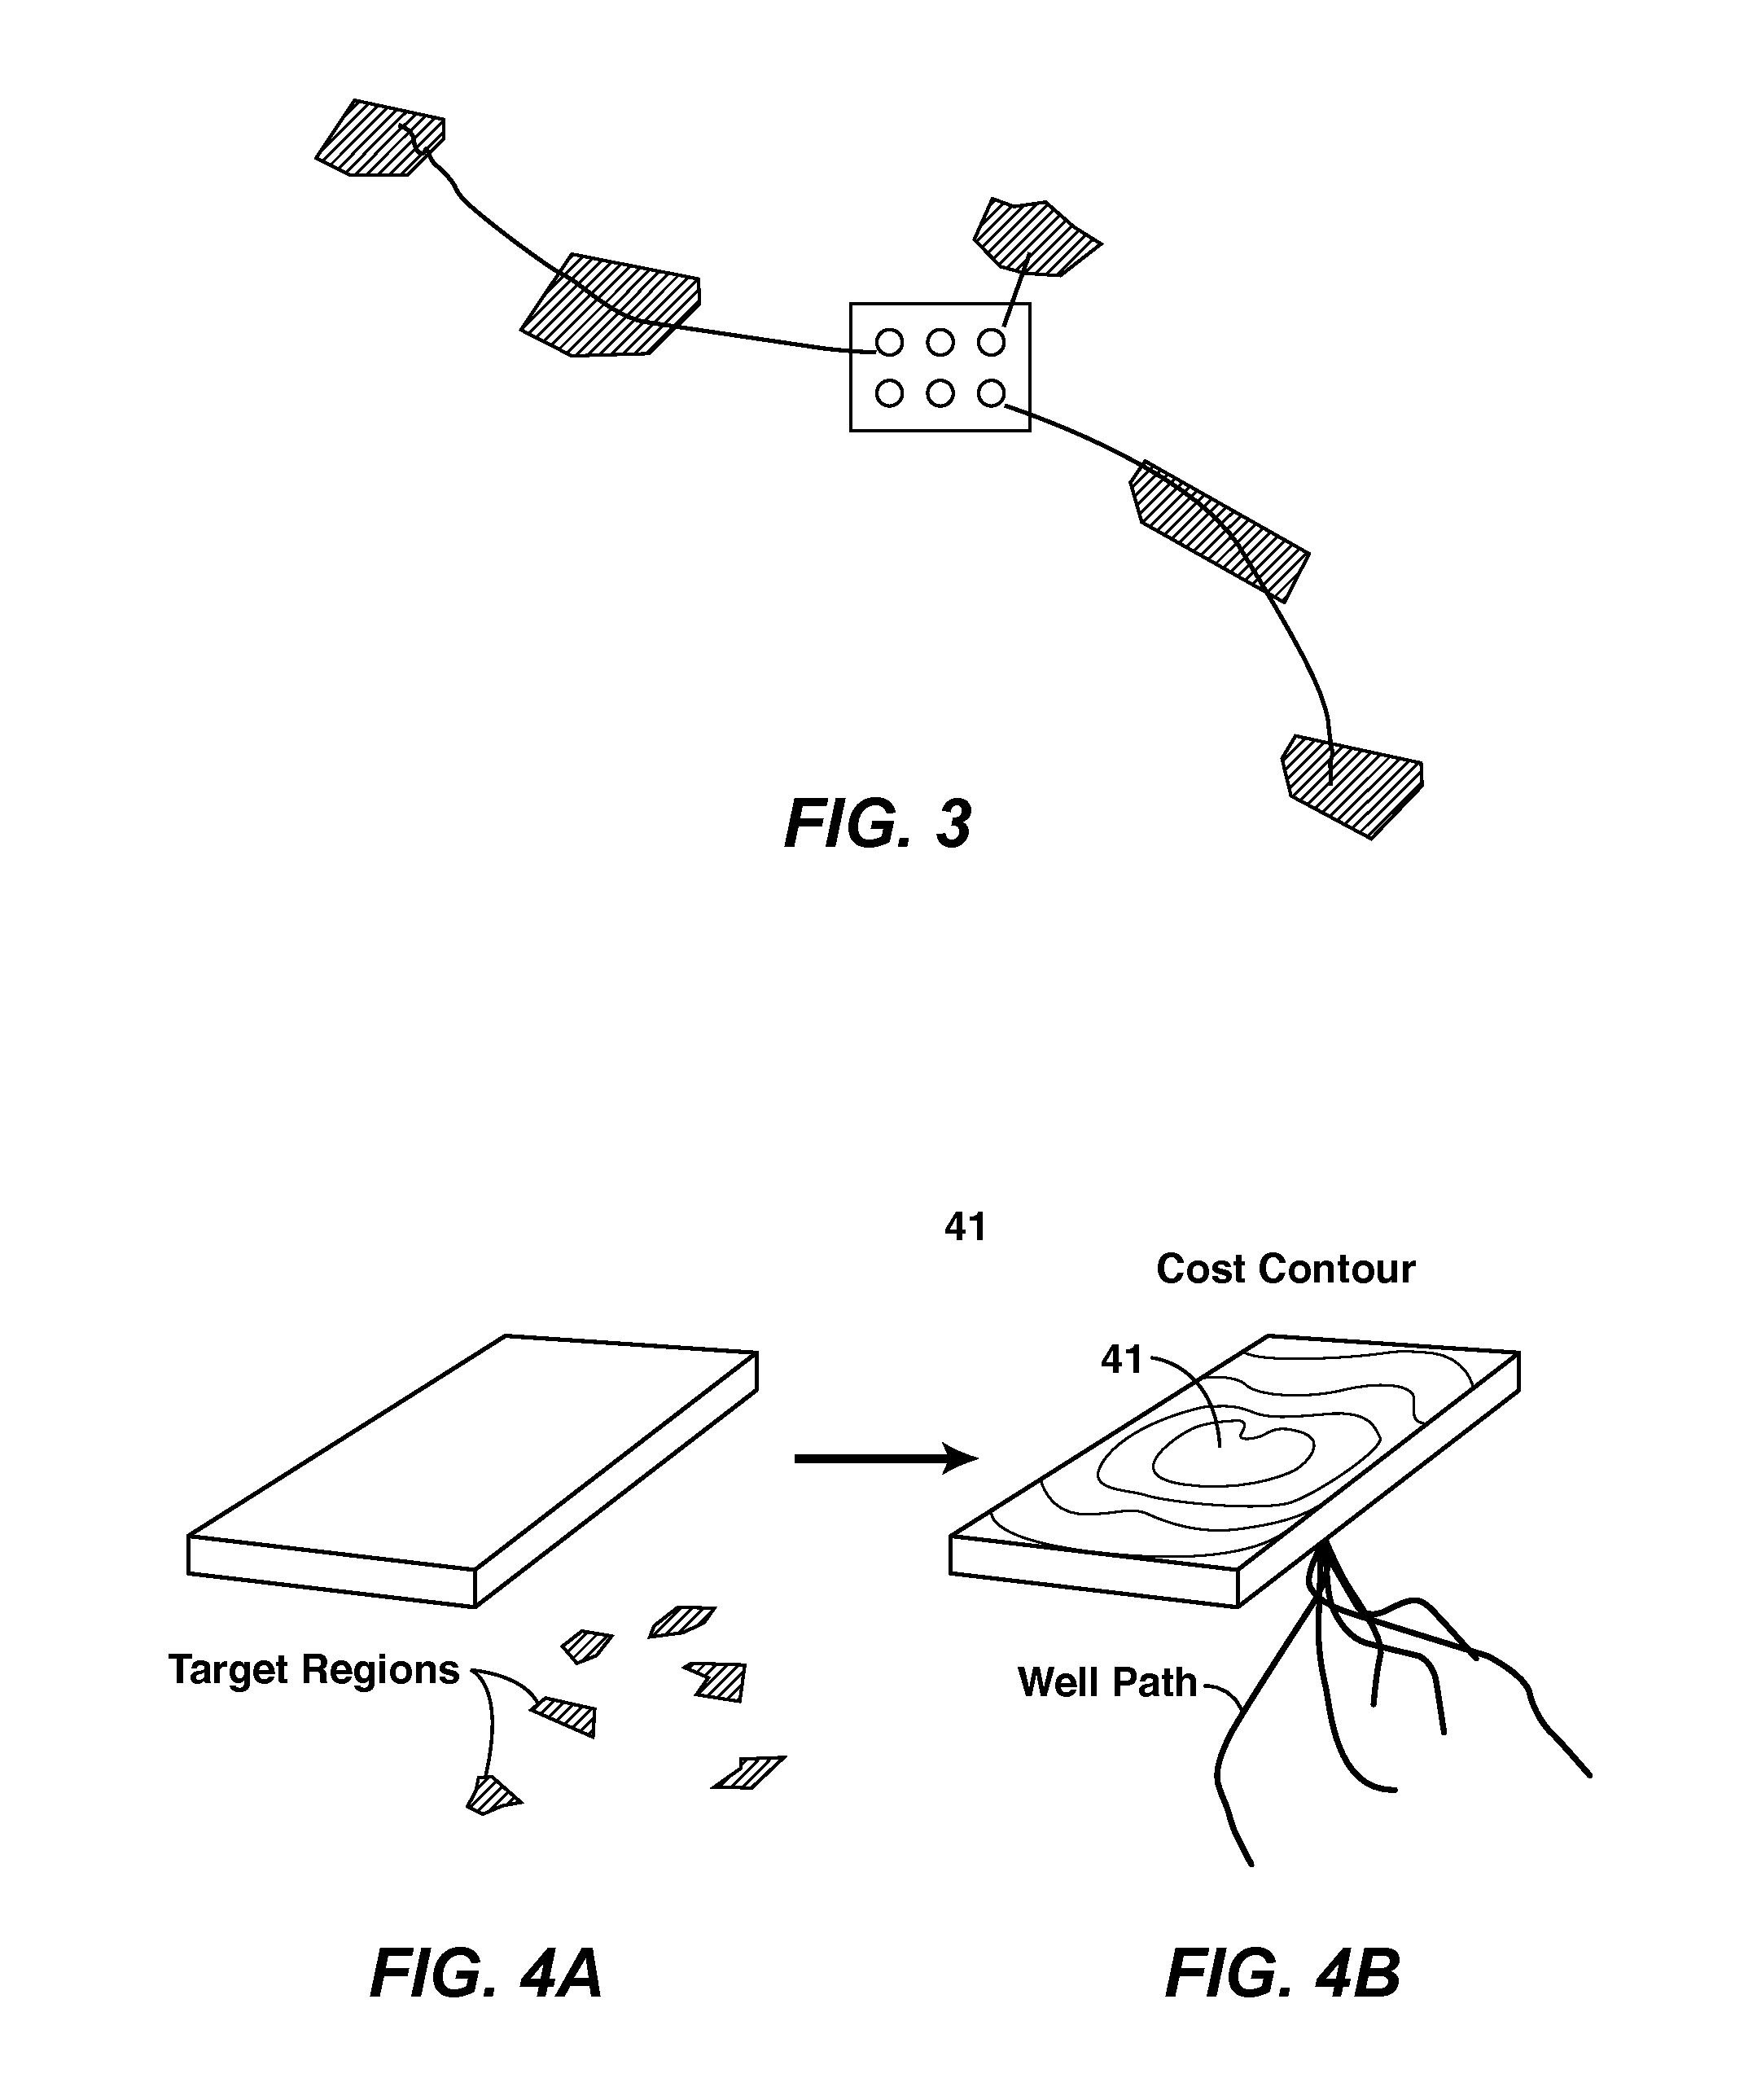 Method For Using Dynamic Target Region For Well Path/Drill Center Optimization